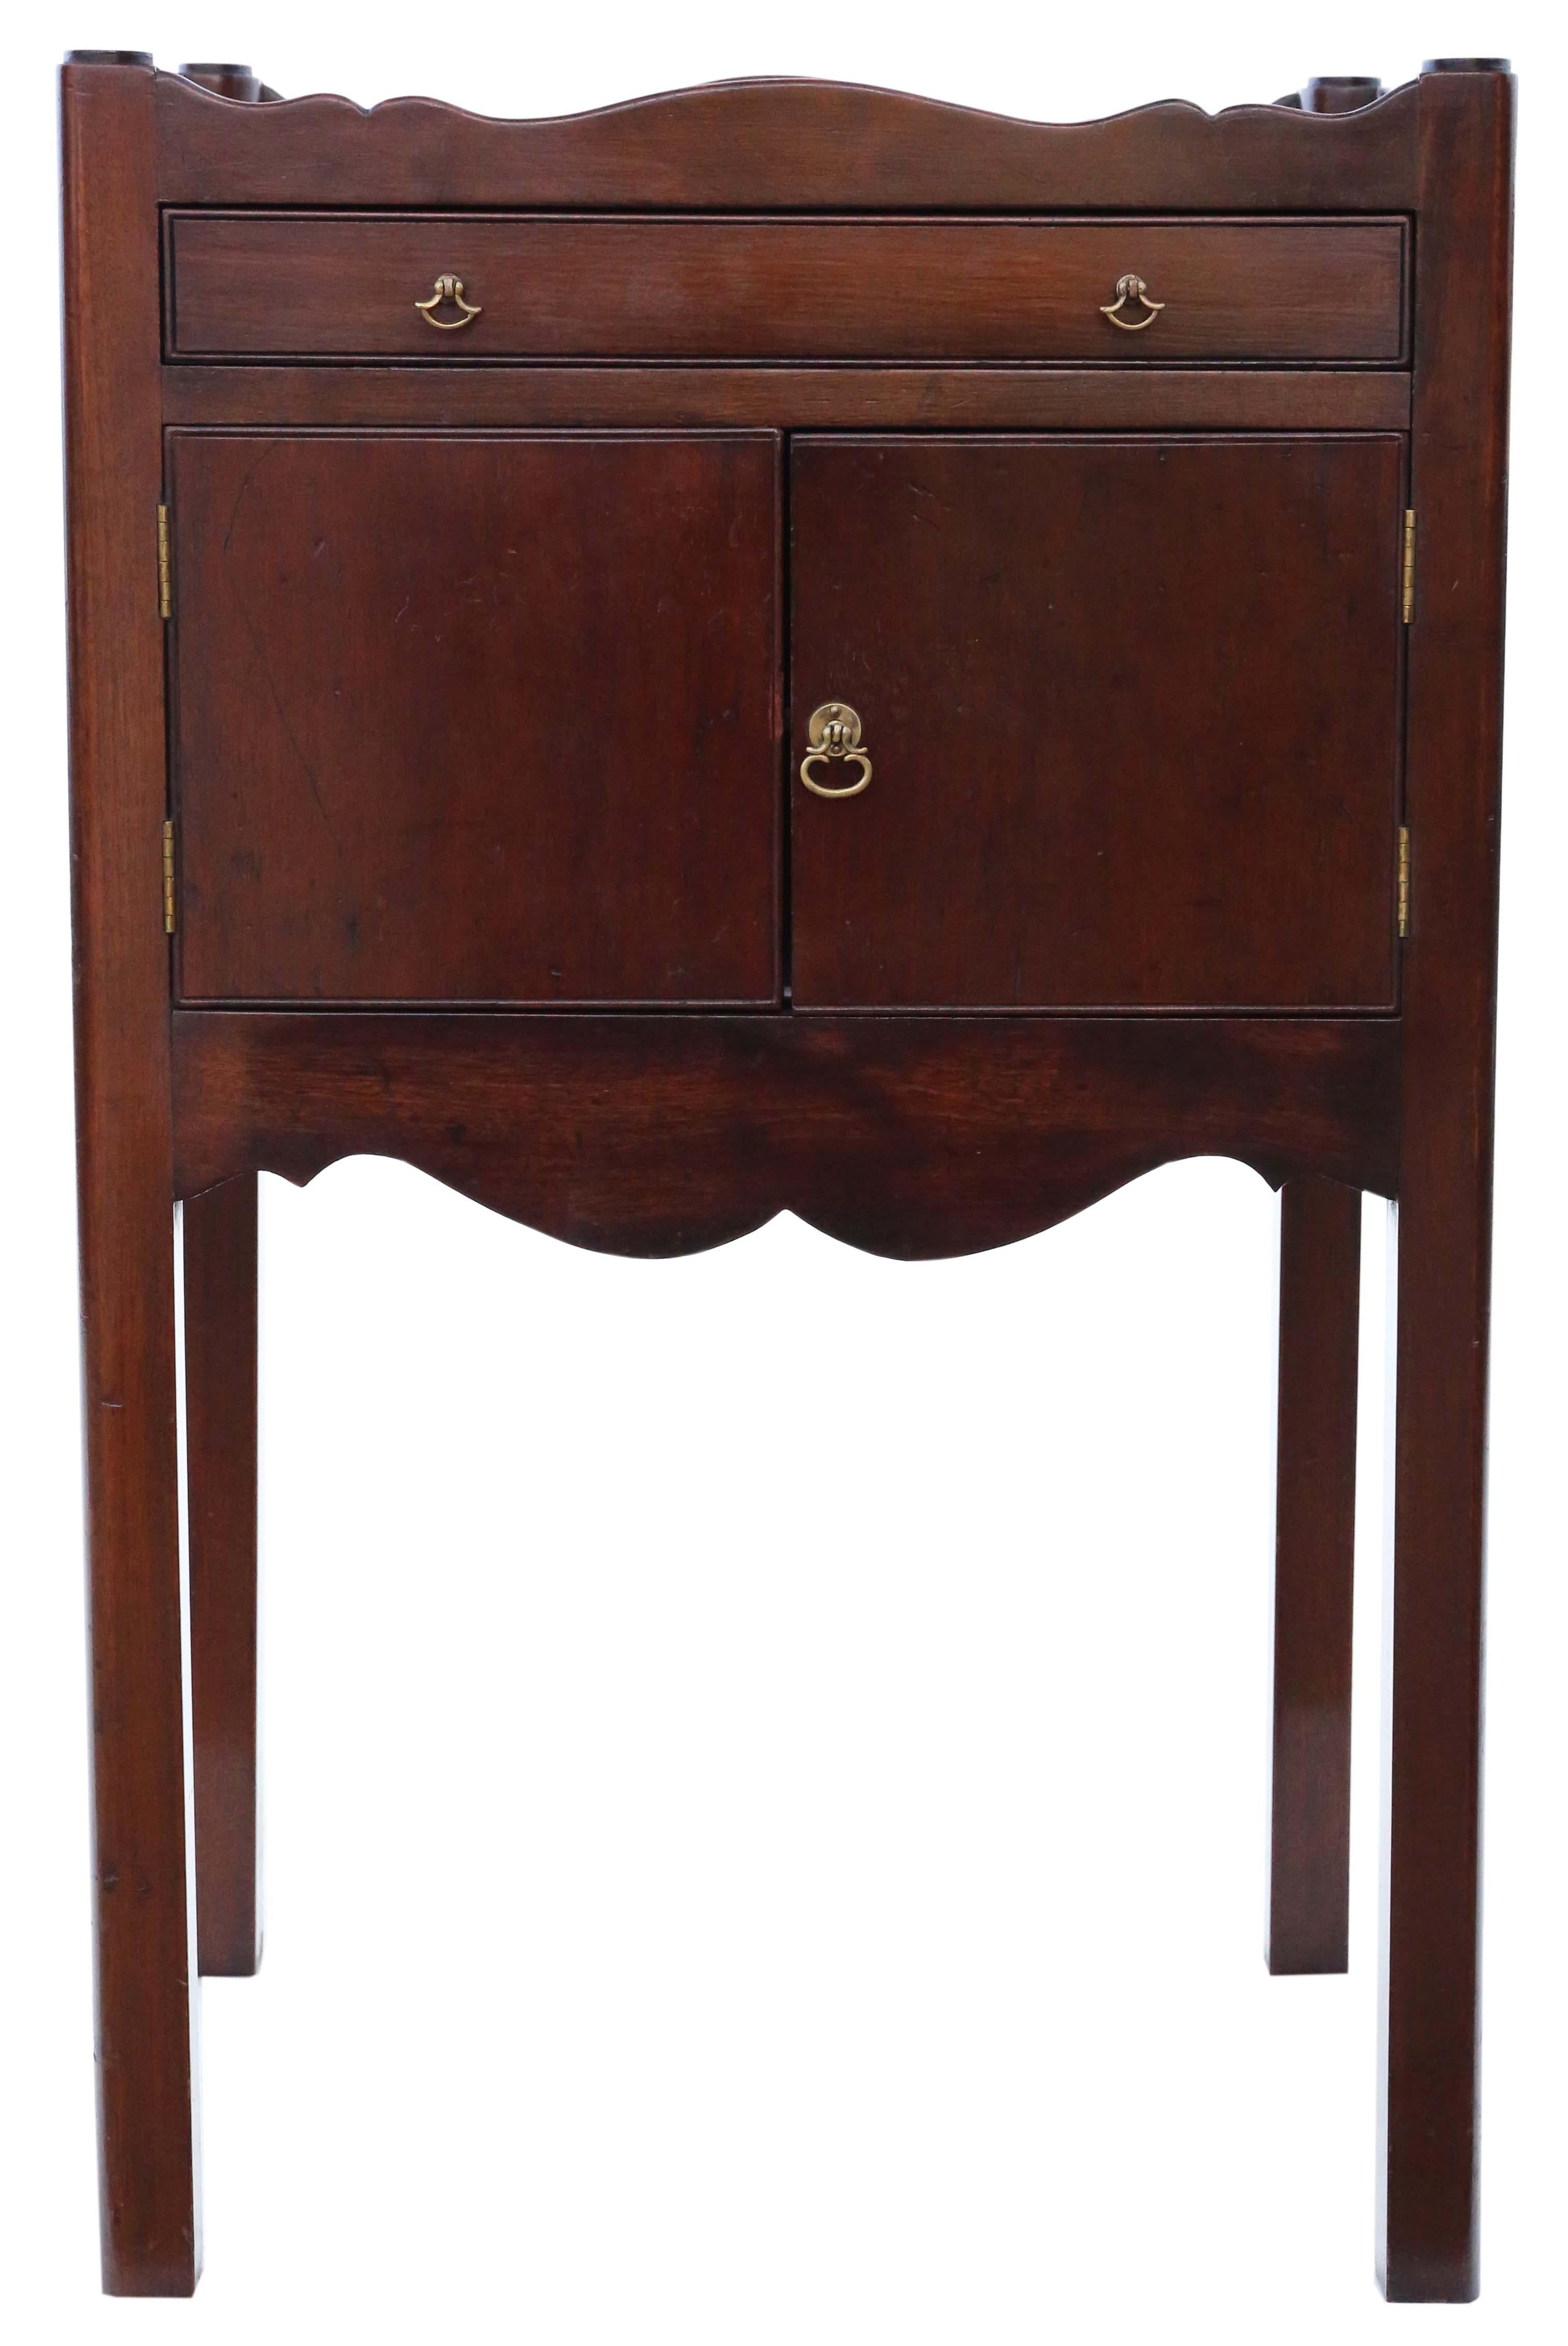 Antique quality 19th Century mahogany tray top washstand bedside table Georgian nightstand .

Great rare item with no loose joints and no woodworm. The doors have catches and the oak lined drawer slides freely.

Lovely age, colour and patina.

50cm